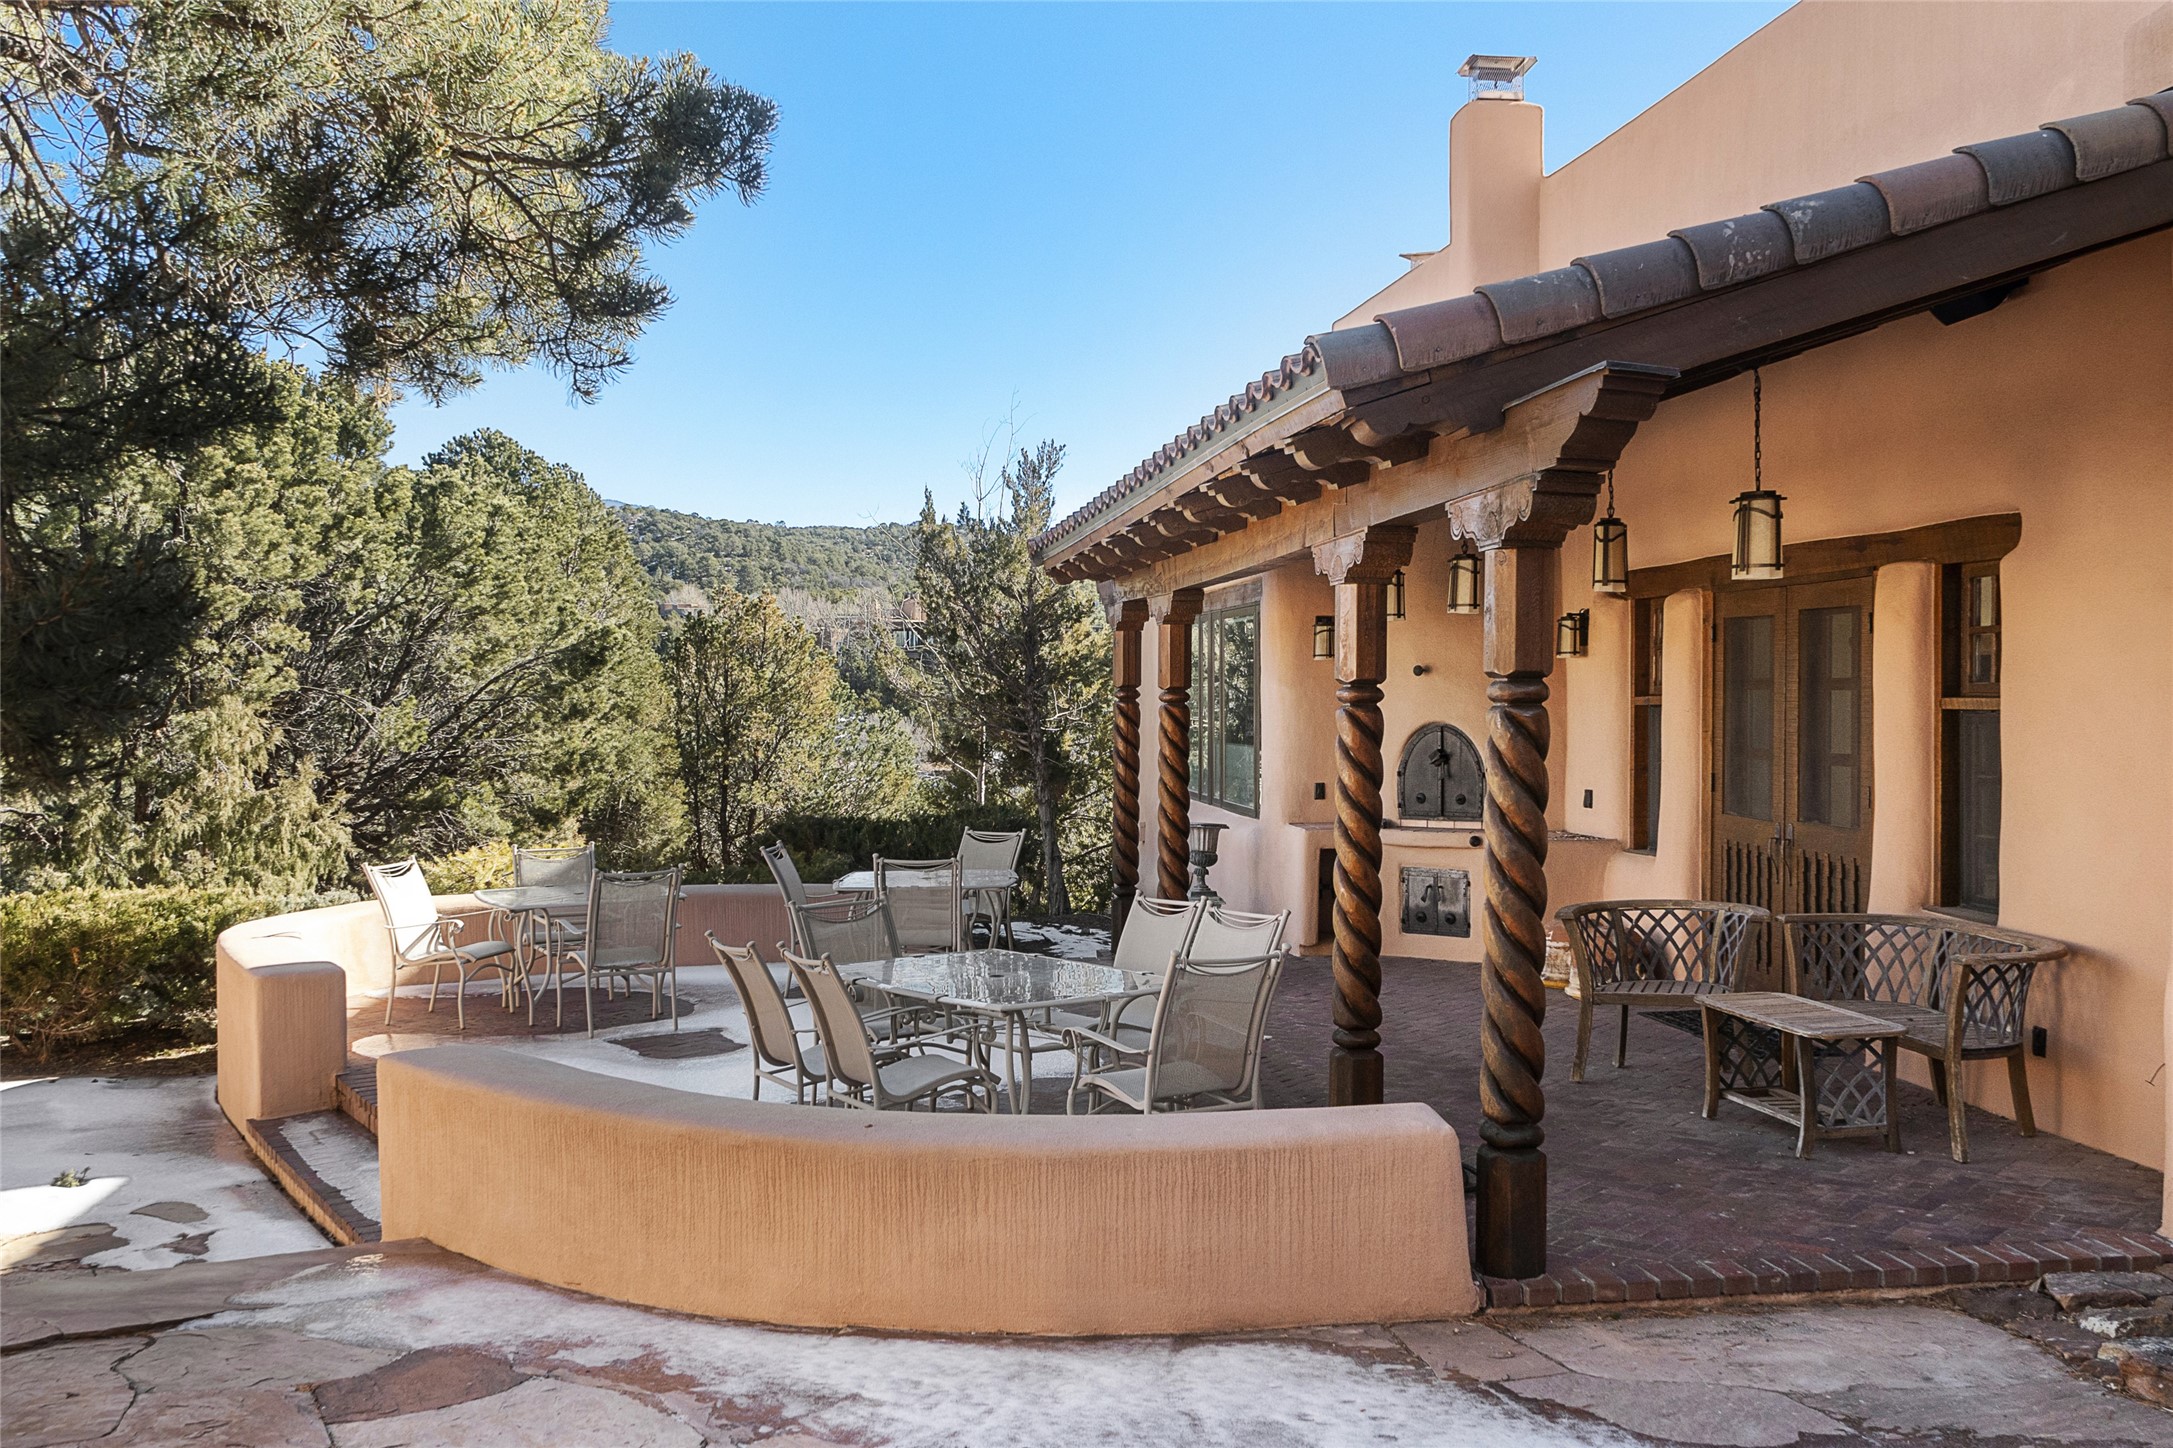 325 Brownell Howland, Santa Fe, New Mexico 87501, 4 Bedrooms Bedrooms, ,8 BathroomsBathrooms,Residential,For Sale,325 Brownell Howland,202234273